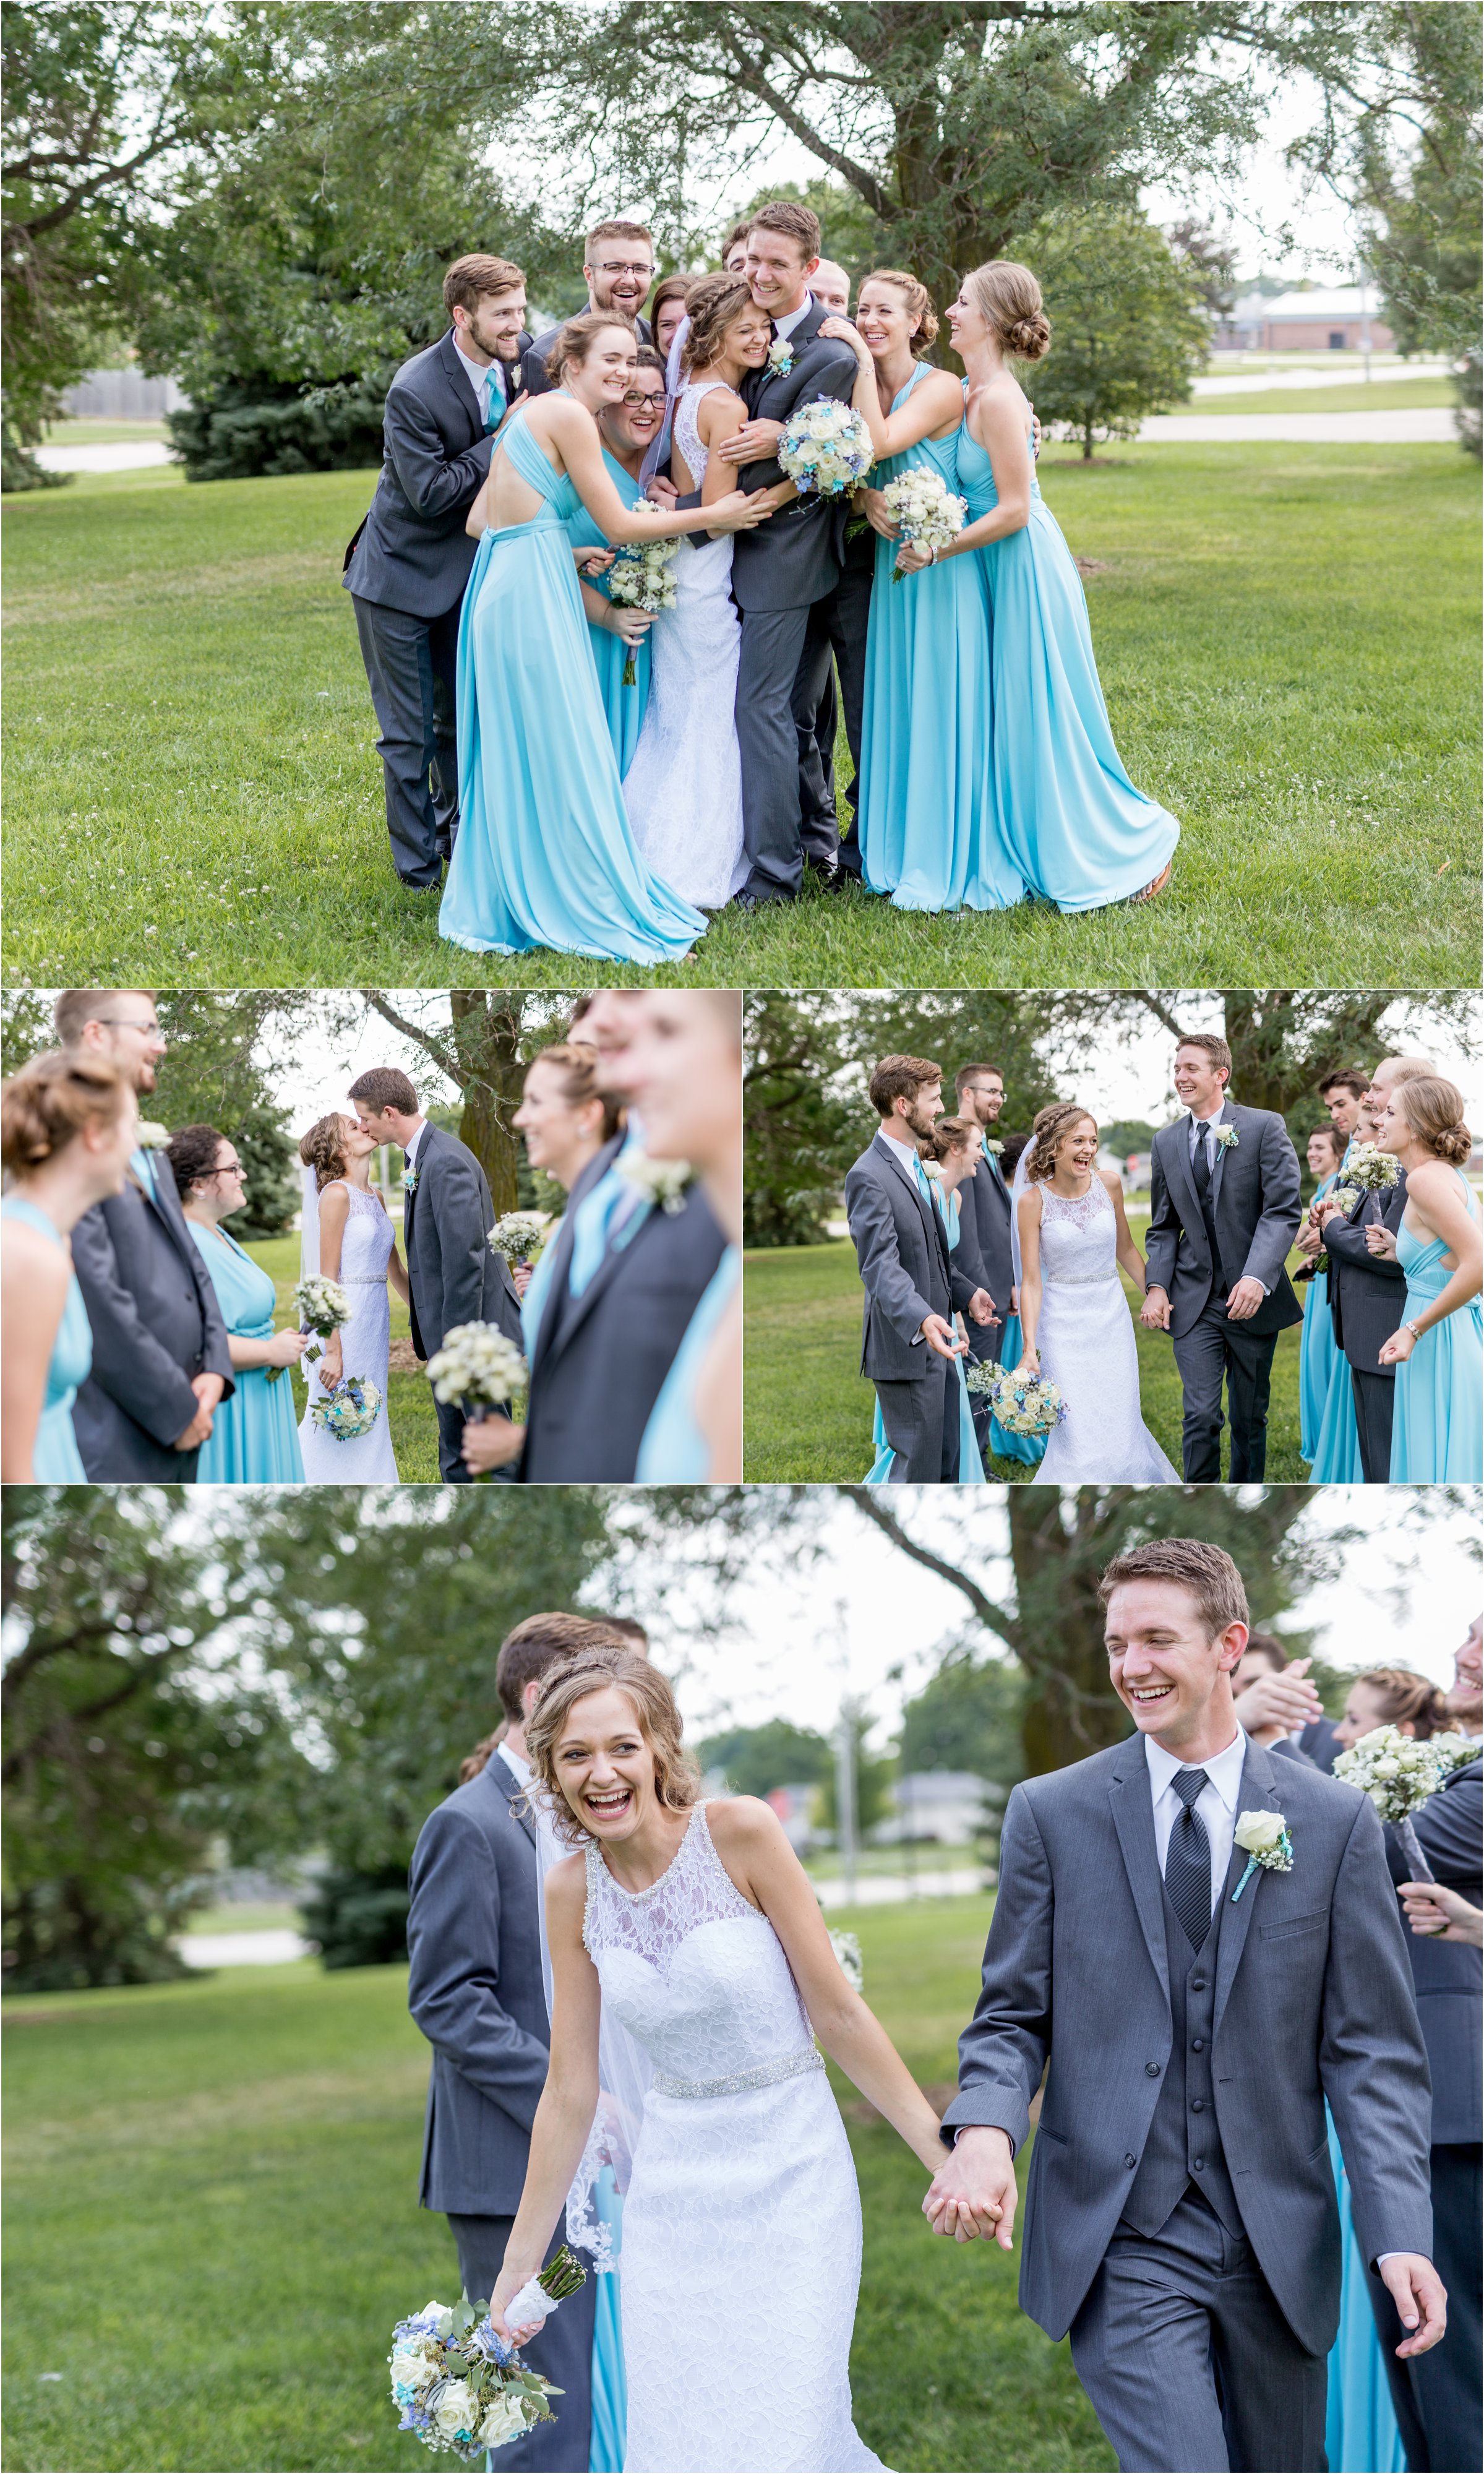 bridesmaids in long blue dresses and groomsmen in gray tuxedos surround the bride and groom